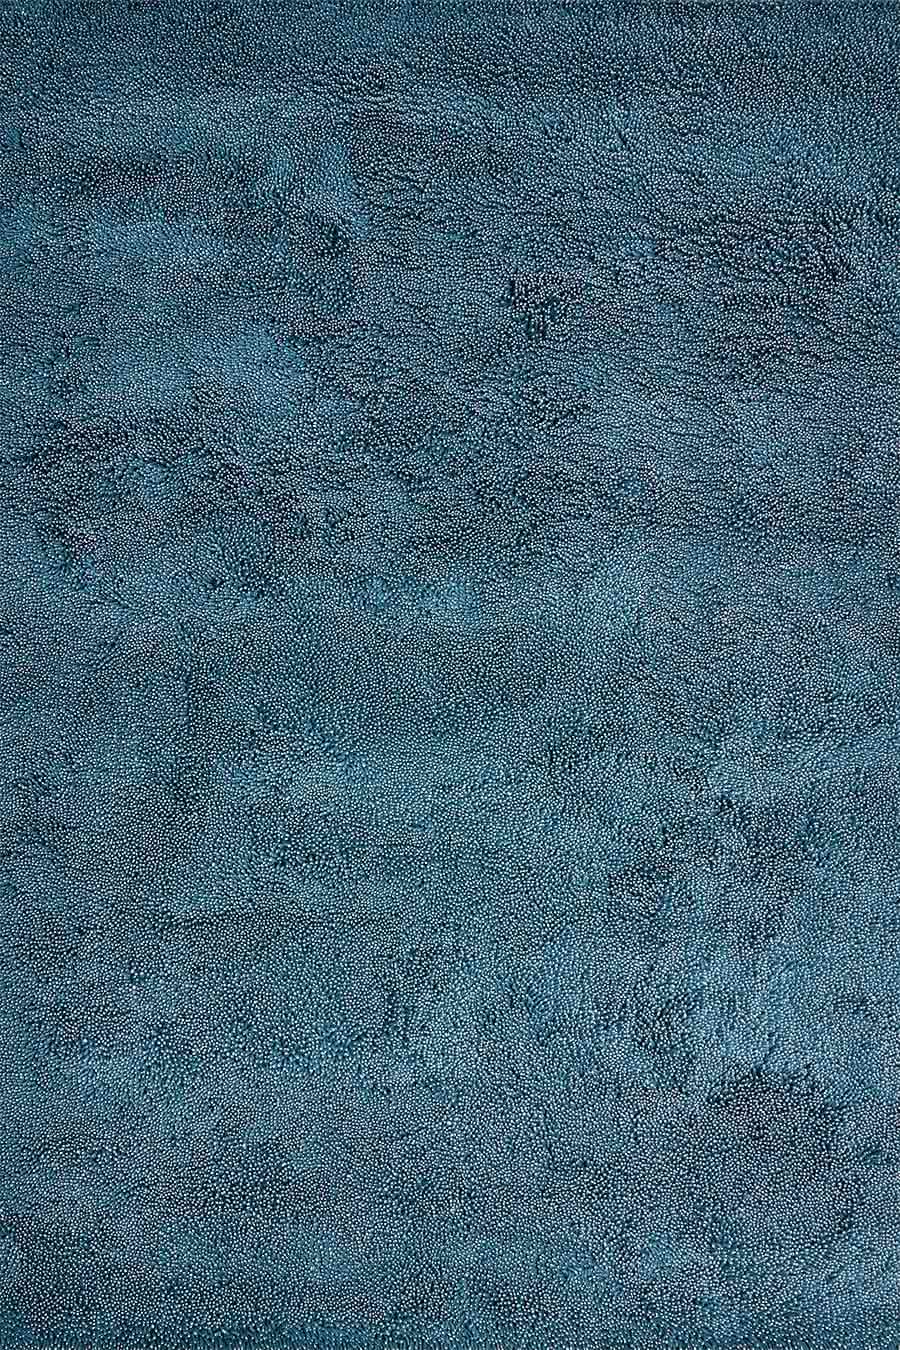 Overhead view of textured Coral Shag rug in teal blue colour